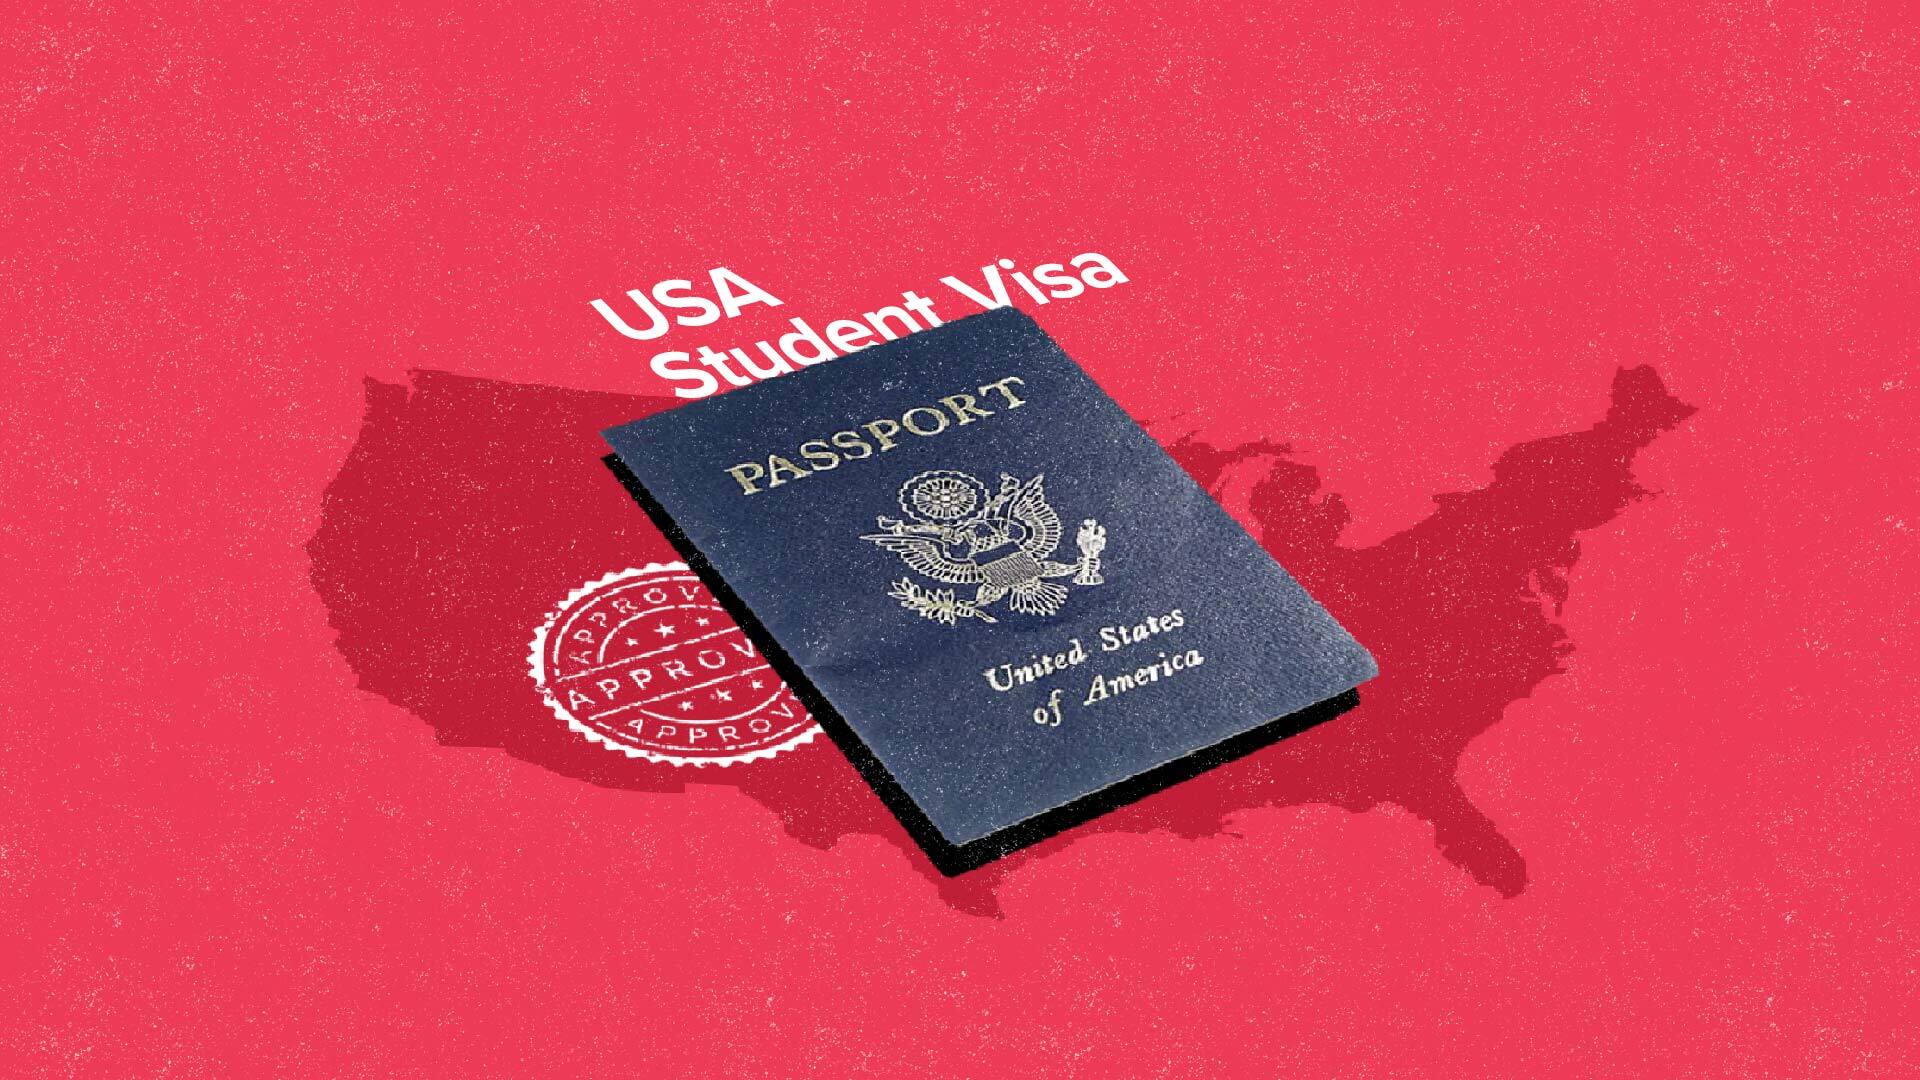 How to secure a study visa to Schengen States